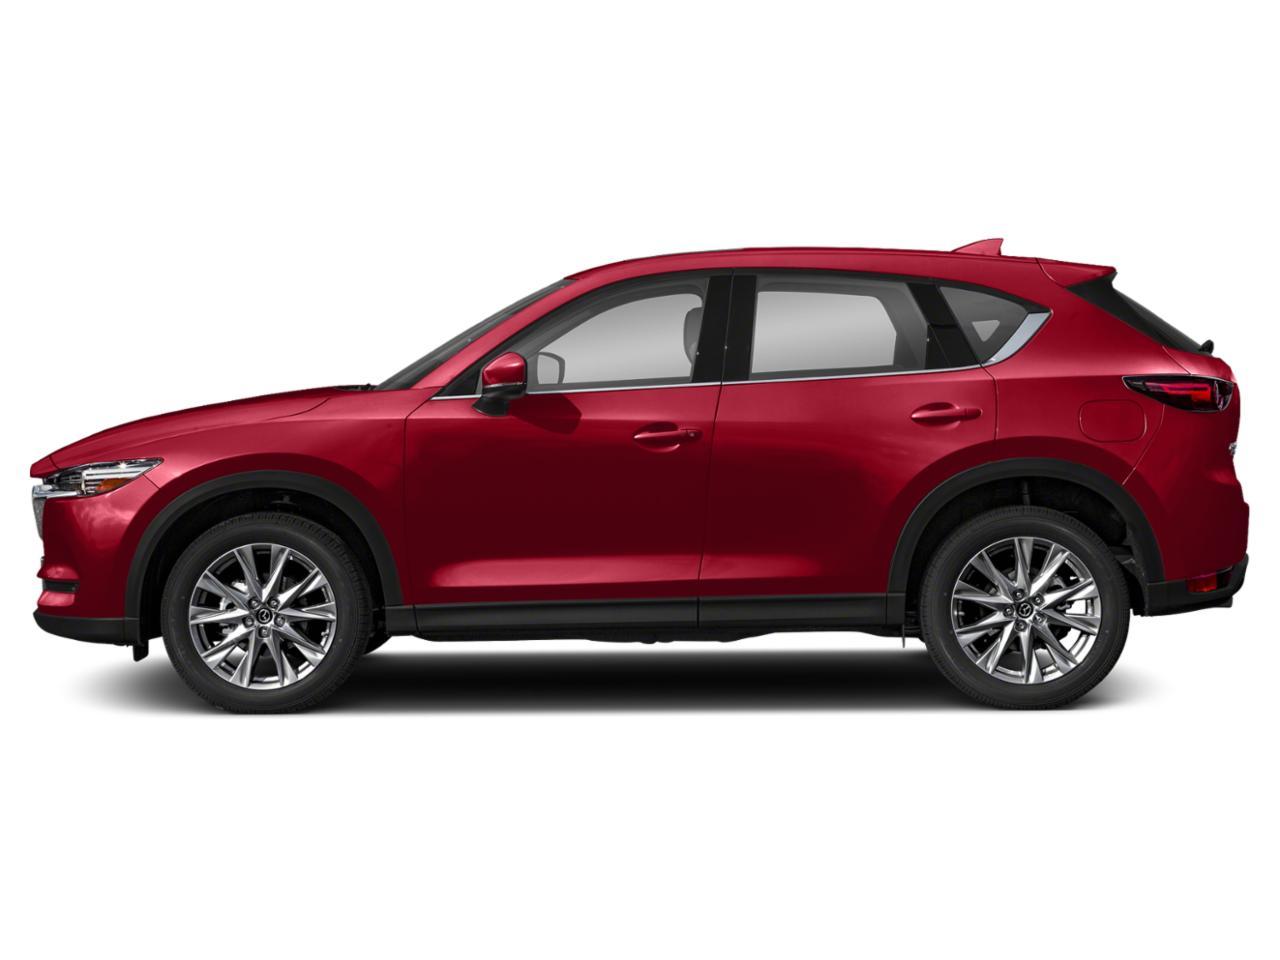 Soul Red Crystal Metallic 2020 Mazda CX-5 for Sale at Bergstrom ...